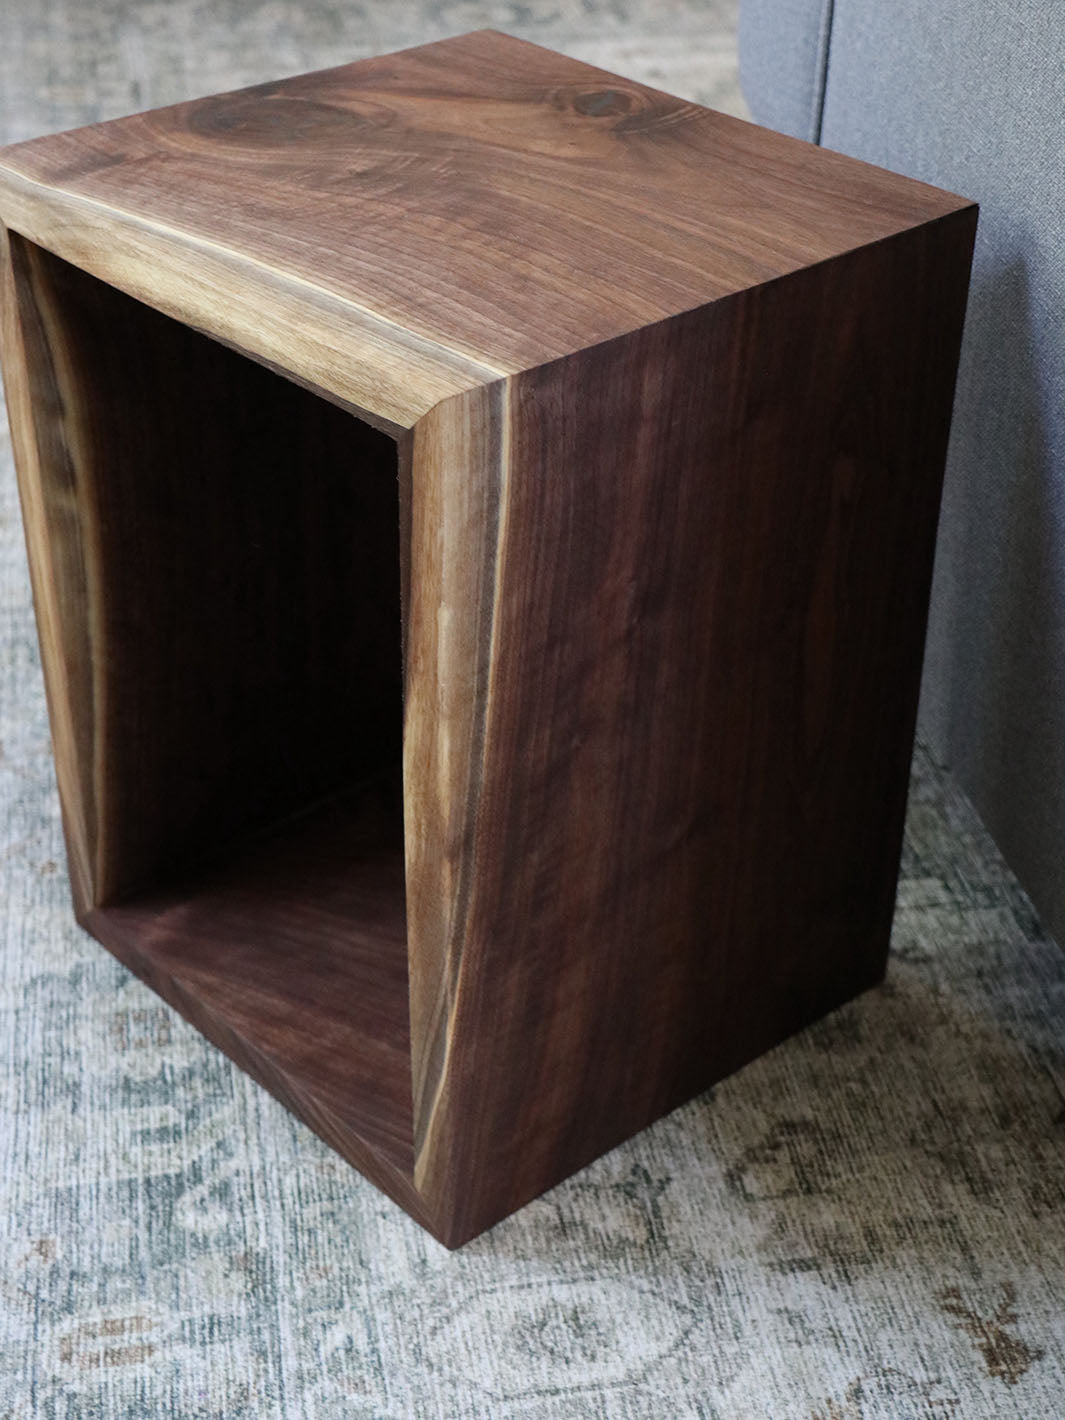 Complete Walnut Waterfall Cube Rectangle Side Table, Cuboid End Table Earthly Comfort Side Tables - 3